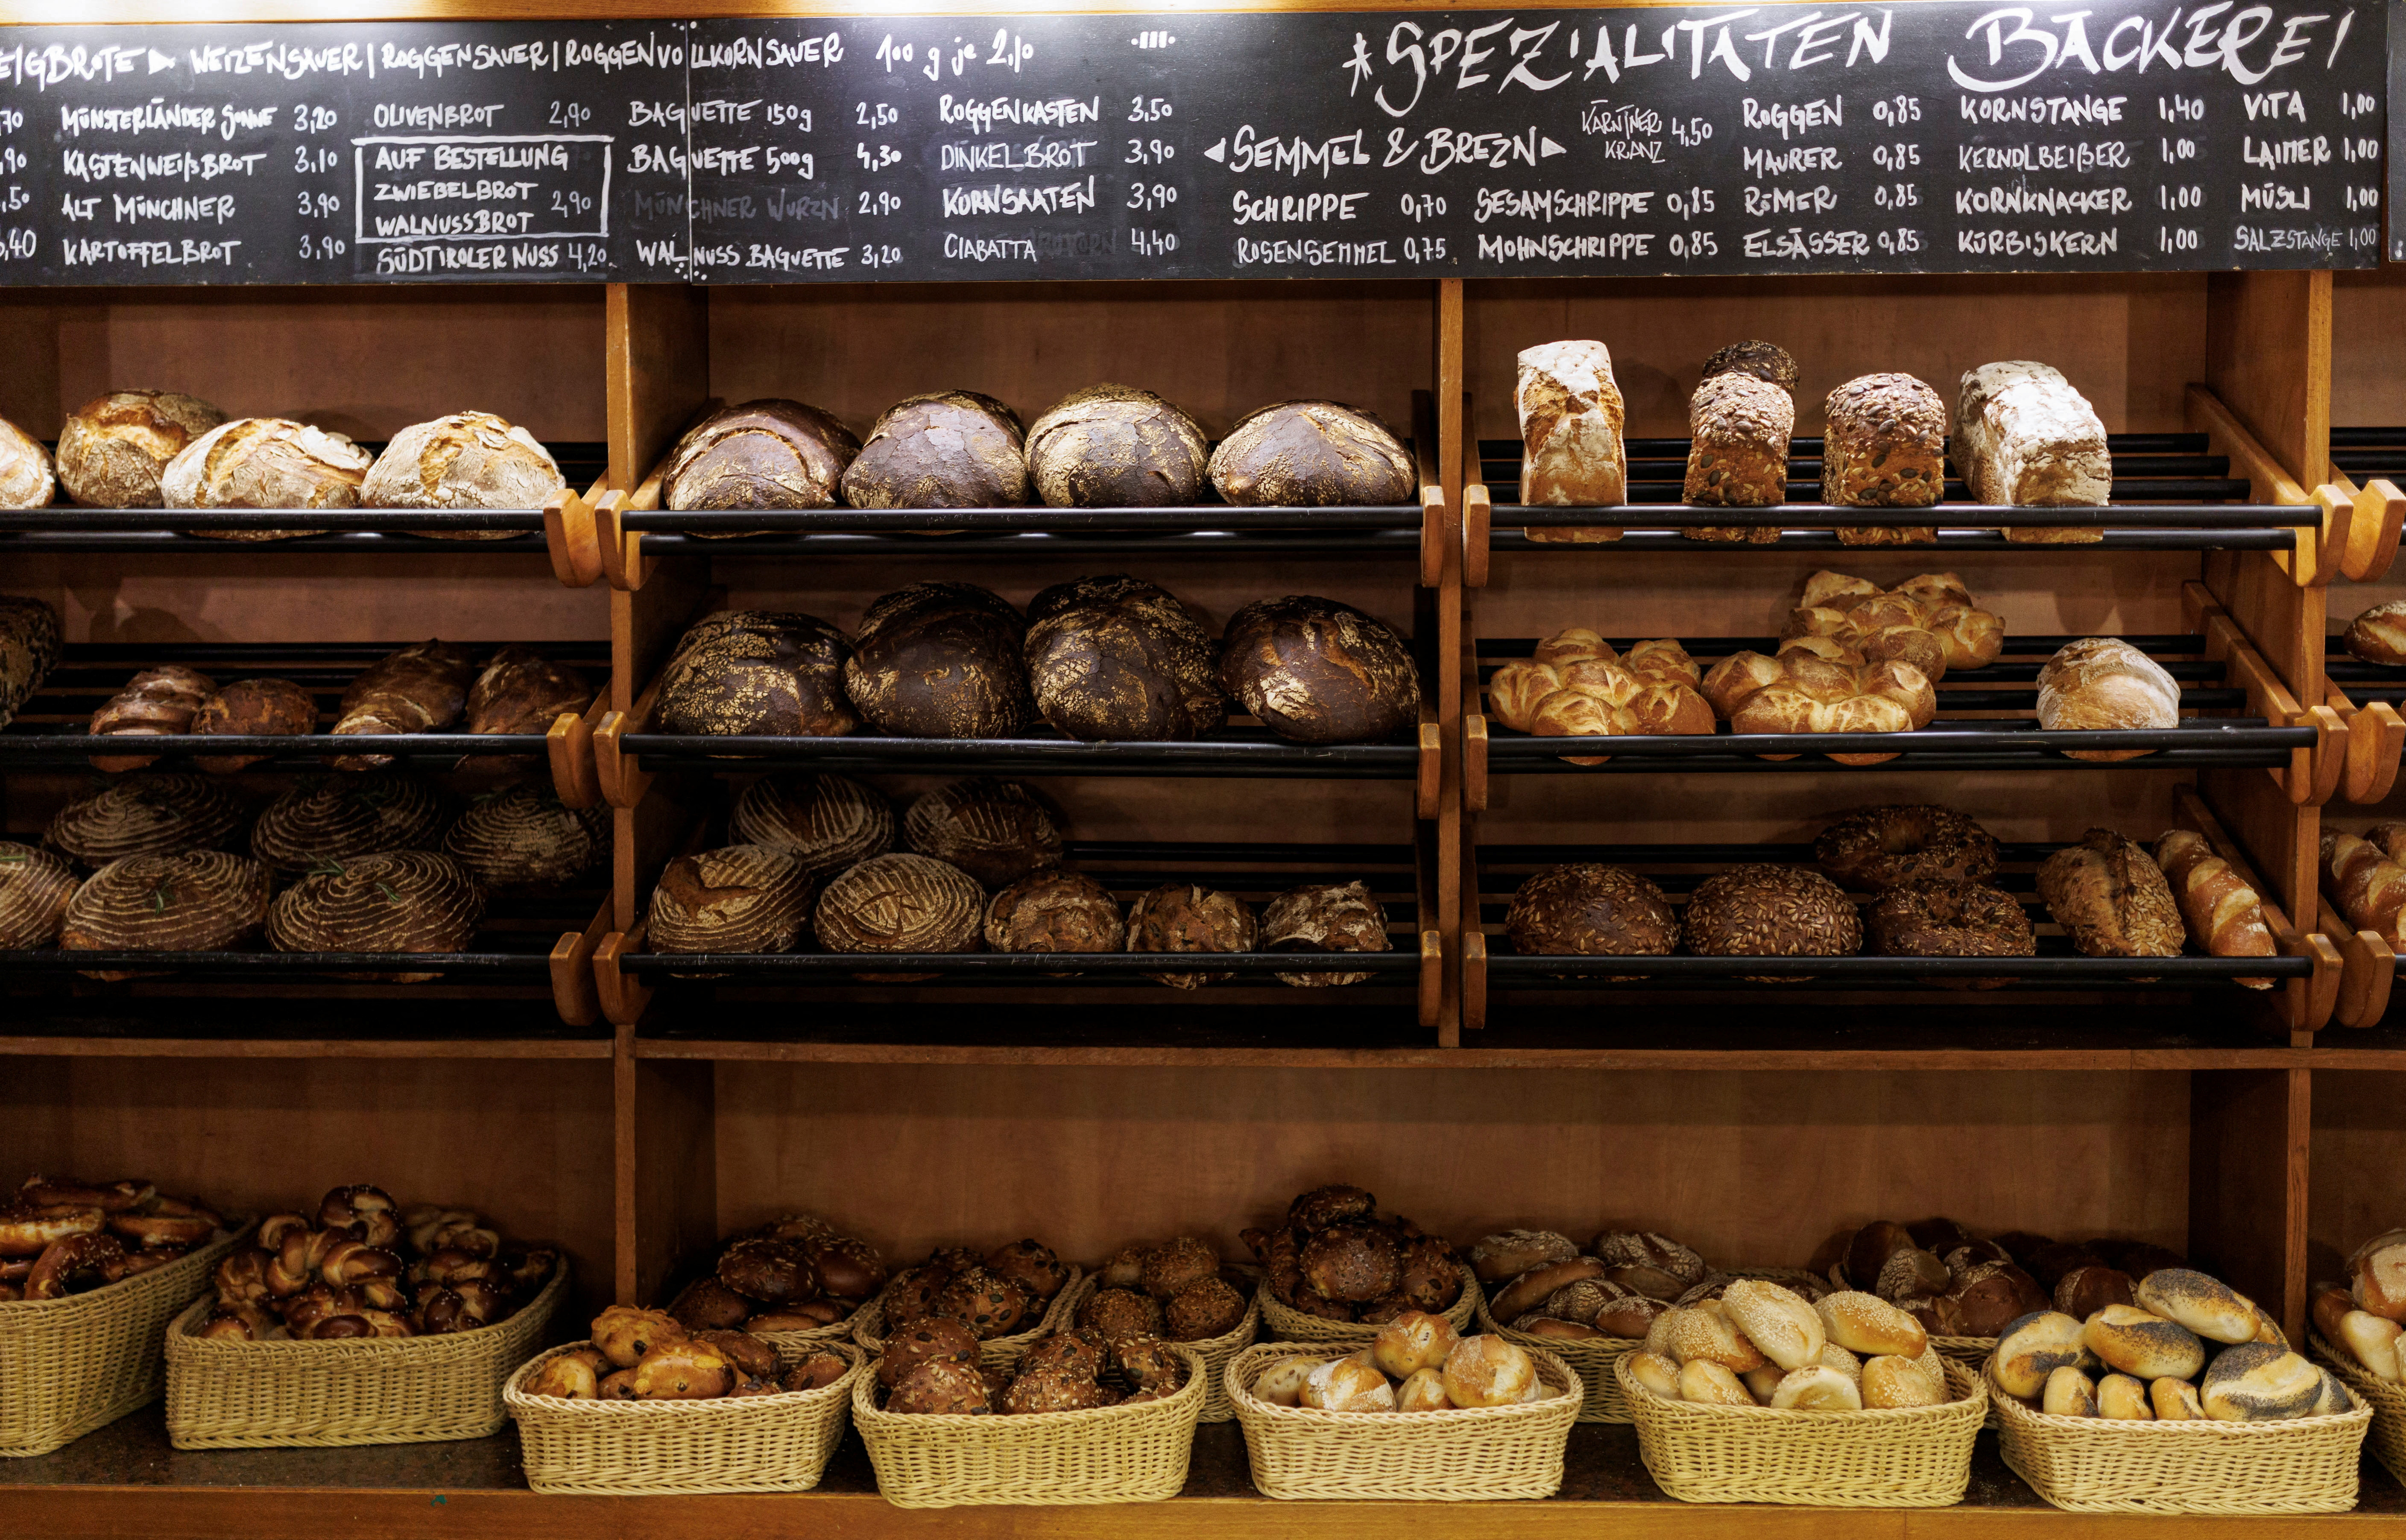 German bakers suffering from higher energy costs